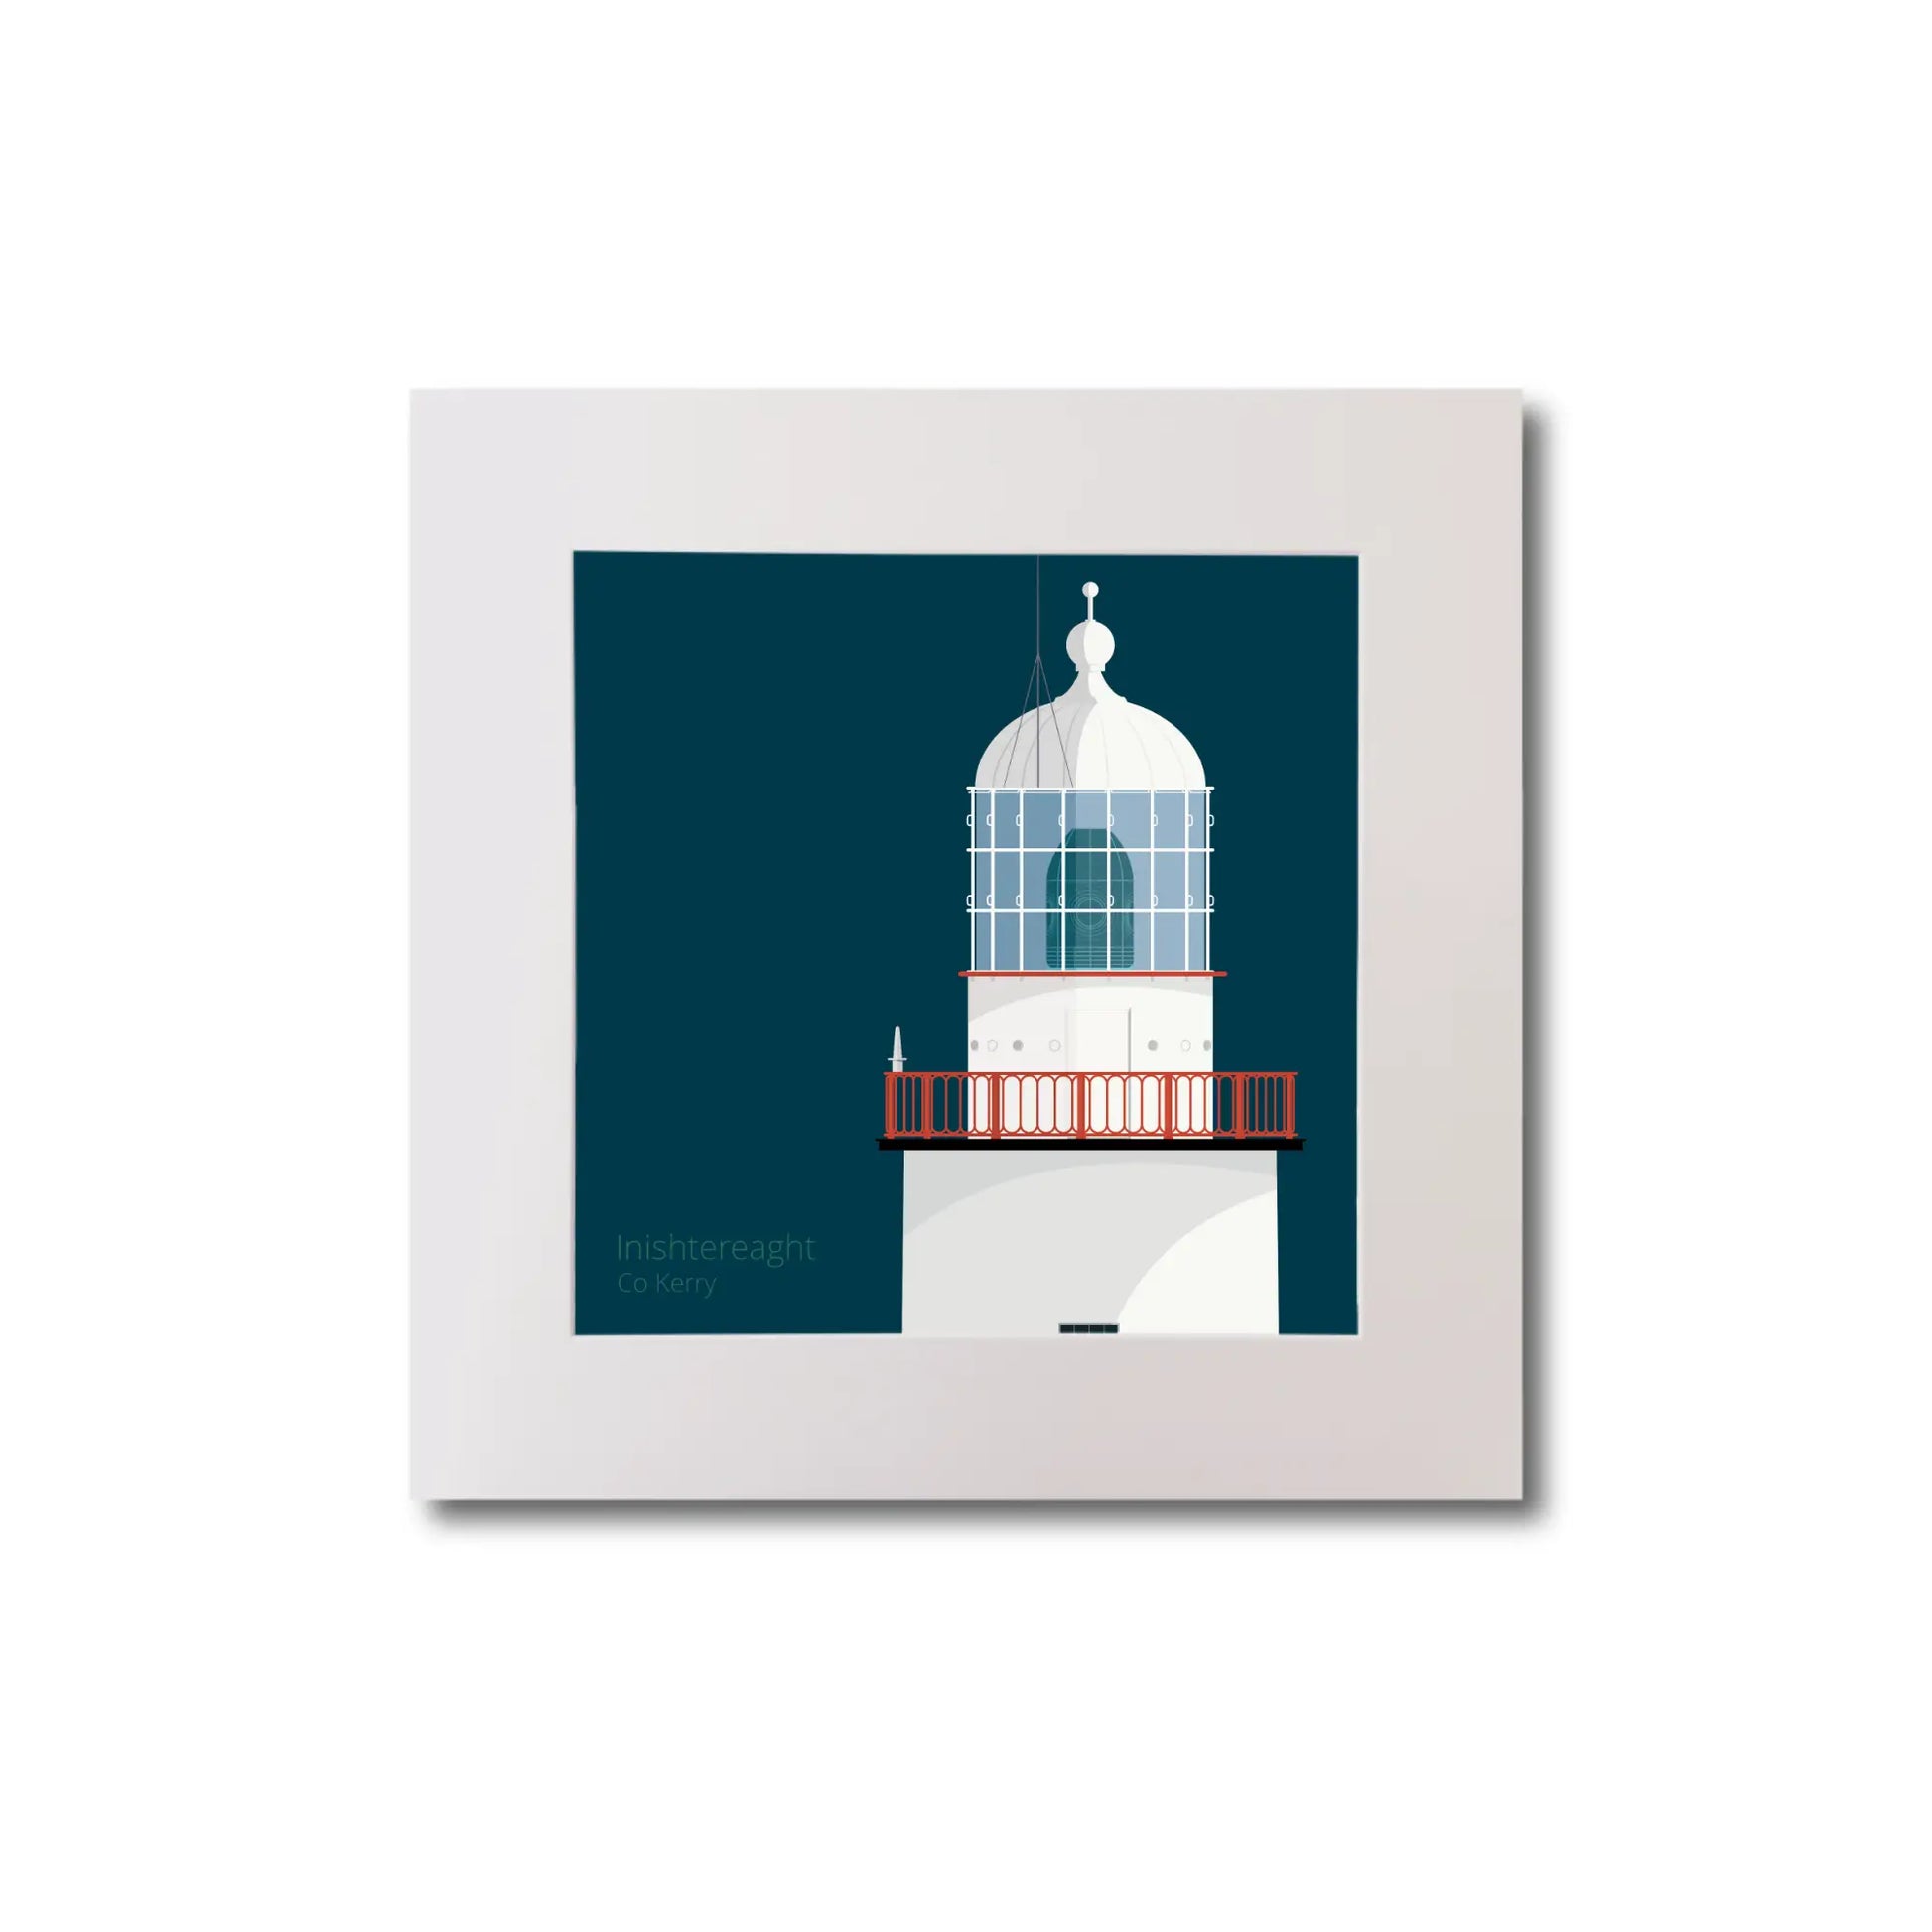 Illustration of Inistearaght lighthouse on a midnight blue background, mounted and measuring 20x20cm.